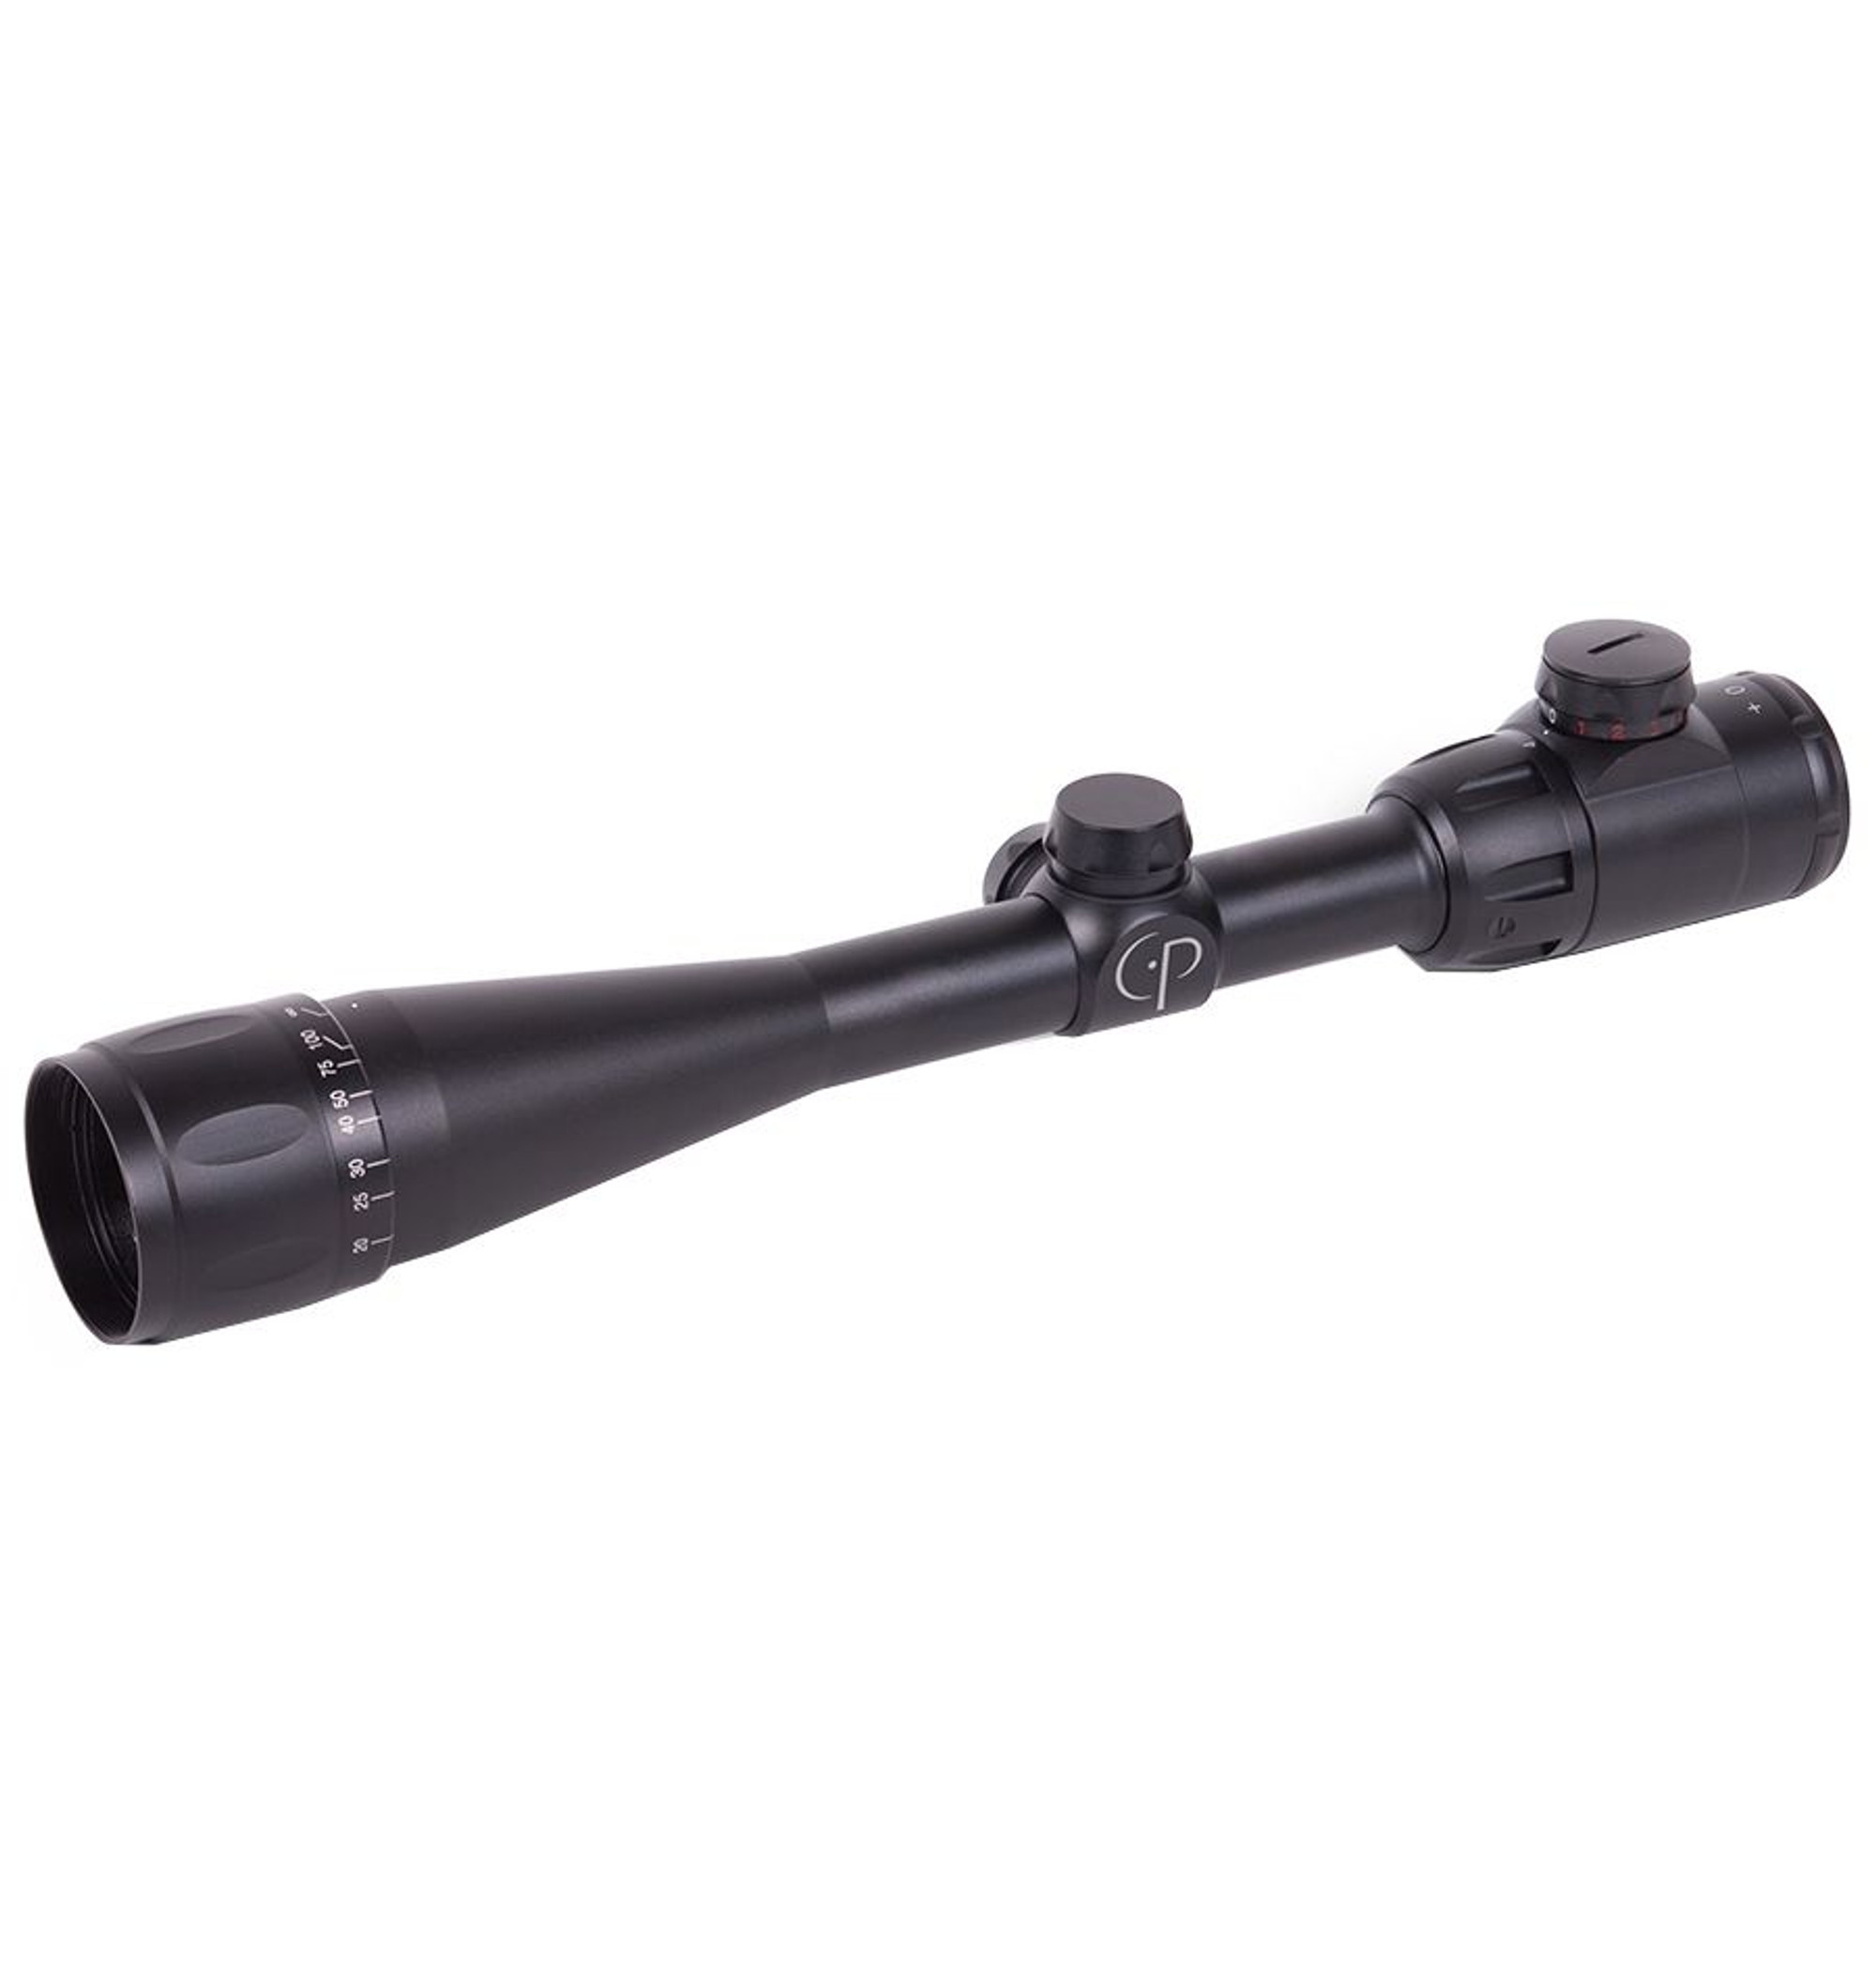 CenterPoint® 4-16x40mm Rifle Scope, TAG-Style Reticle W/Illumination, Picatinny Rings